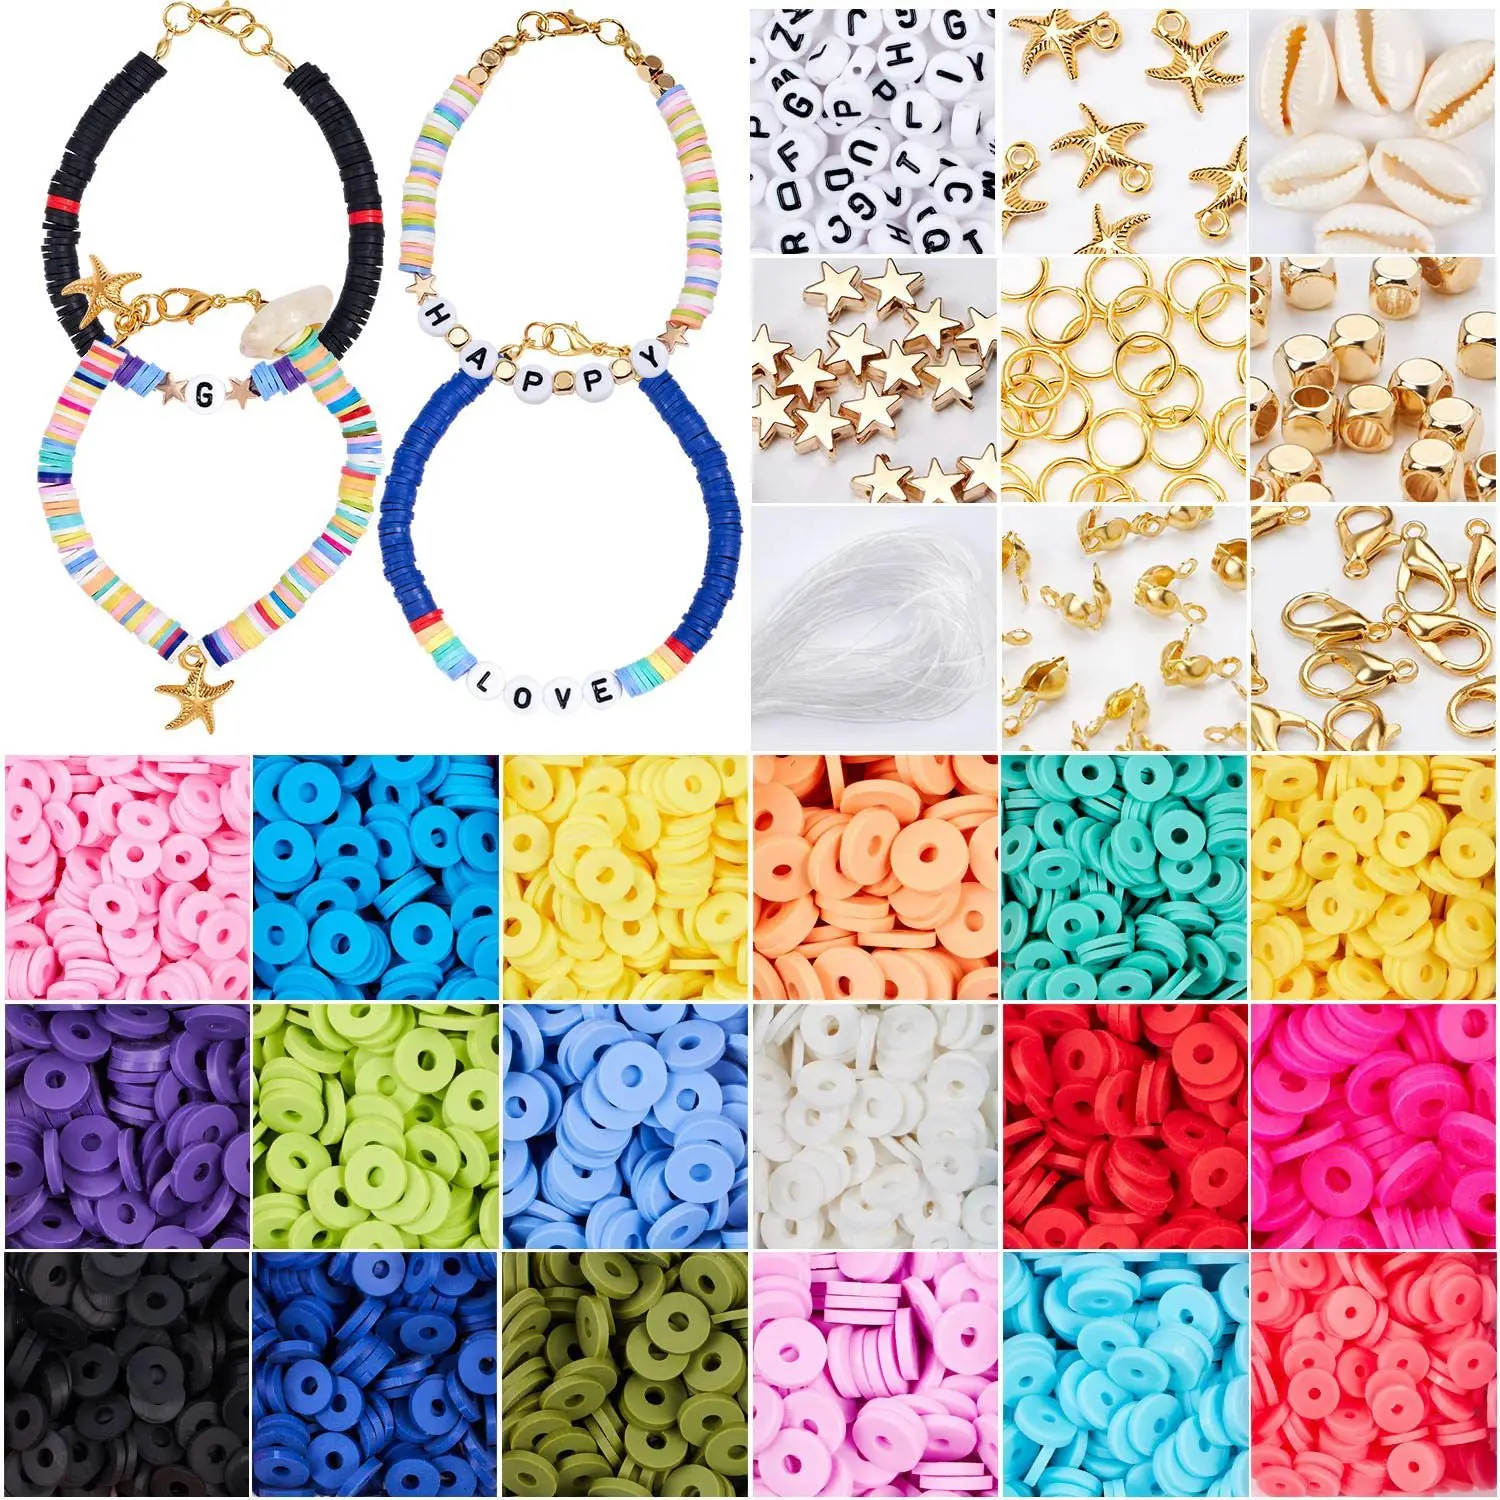 

Amazon Wholesale 6mm Flat Round Spacer Bead Polymer Clay Beads Kit with Acrylic Alphabet/Letter Beads For Jewelry Making